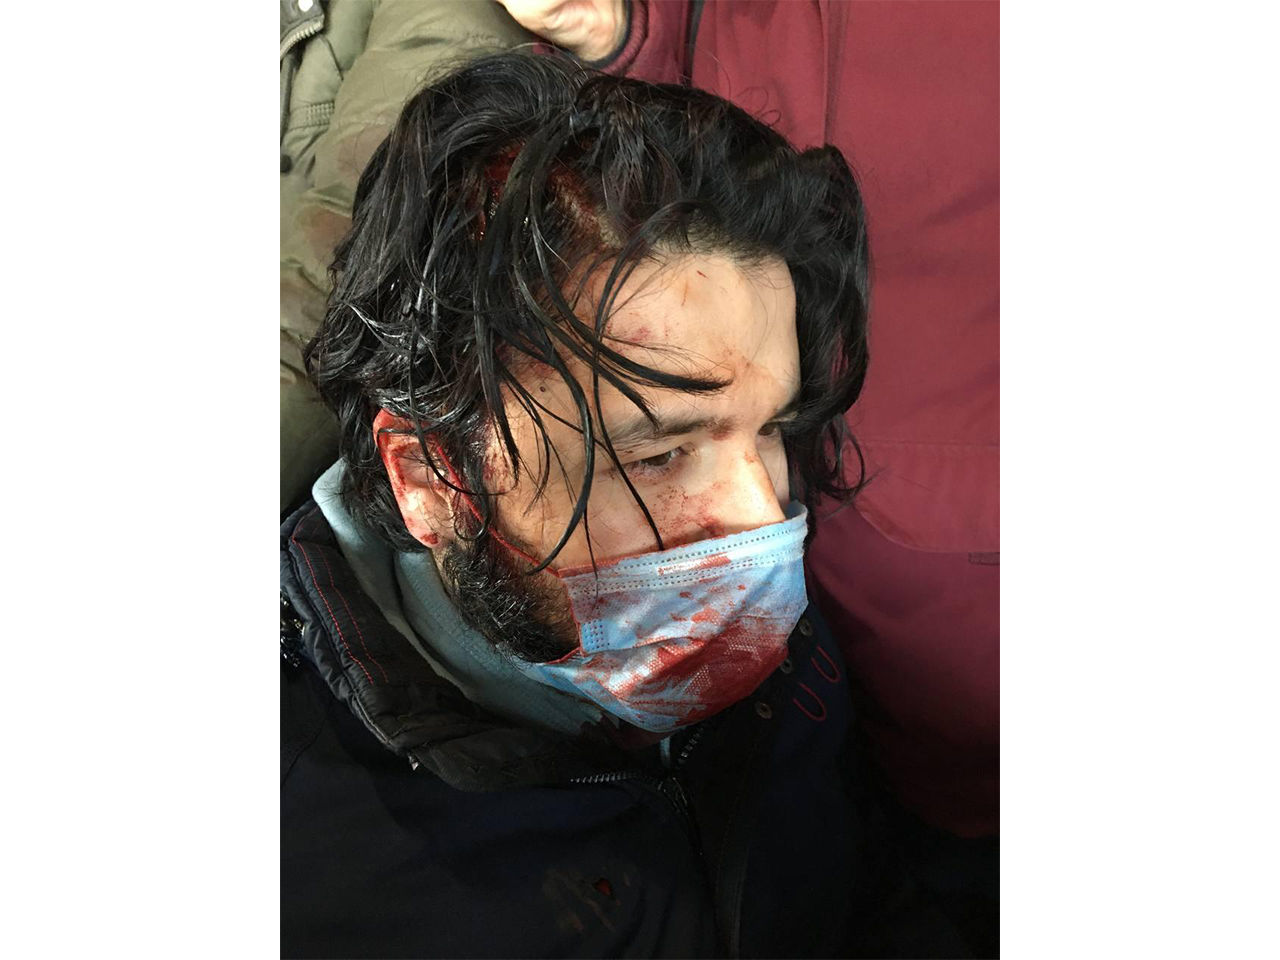 Shukhrat Shiroliev's head was smashed during detention. According to him, he was detained at the monument to Peter the Great in St. Petersburg, knocked to the ground and beaten with police truncheons. March 6, 2022 / Photo provided by other detainees